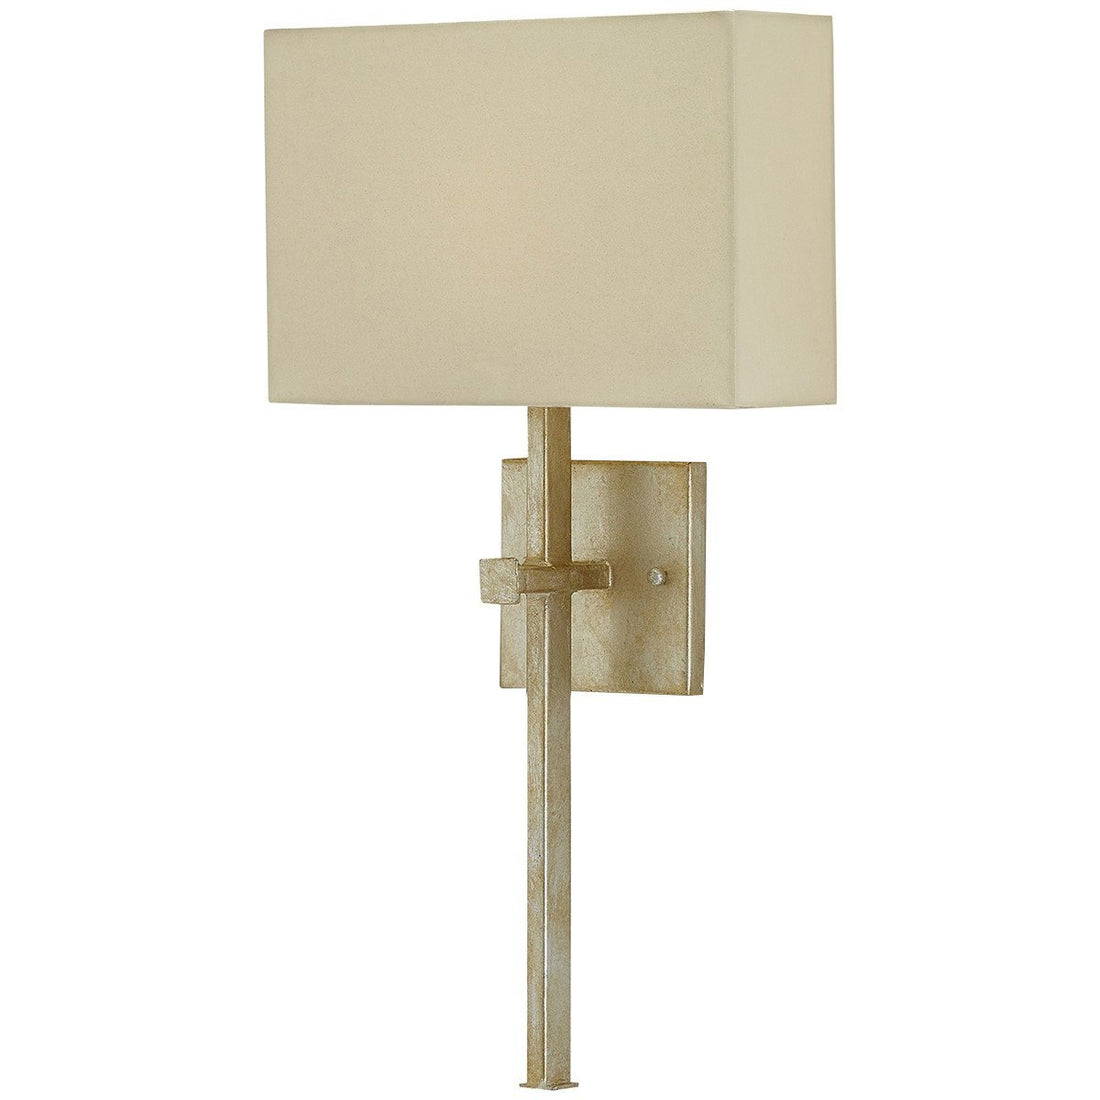 Currey and Company Ashdown Wall Sconce